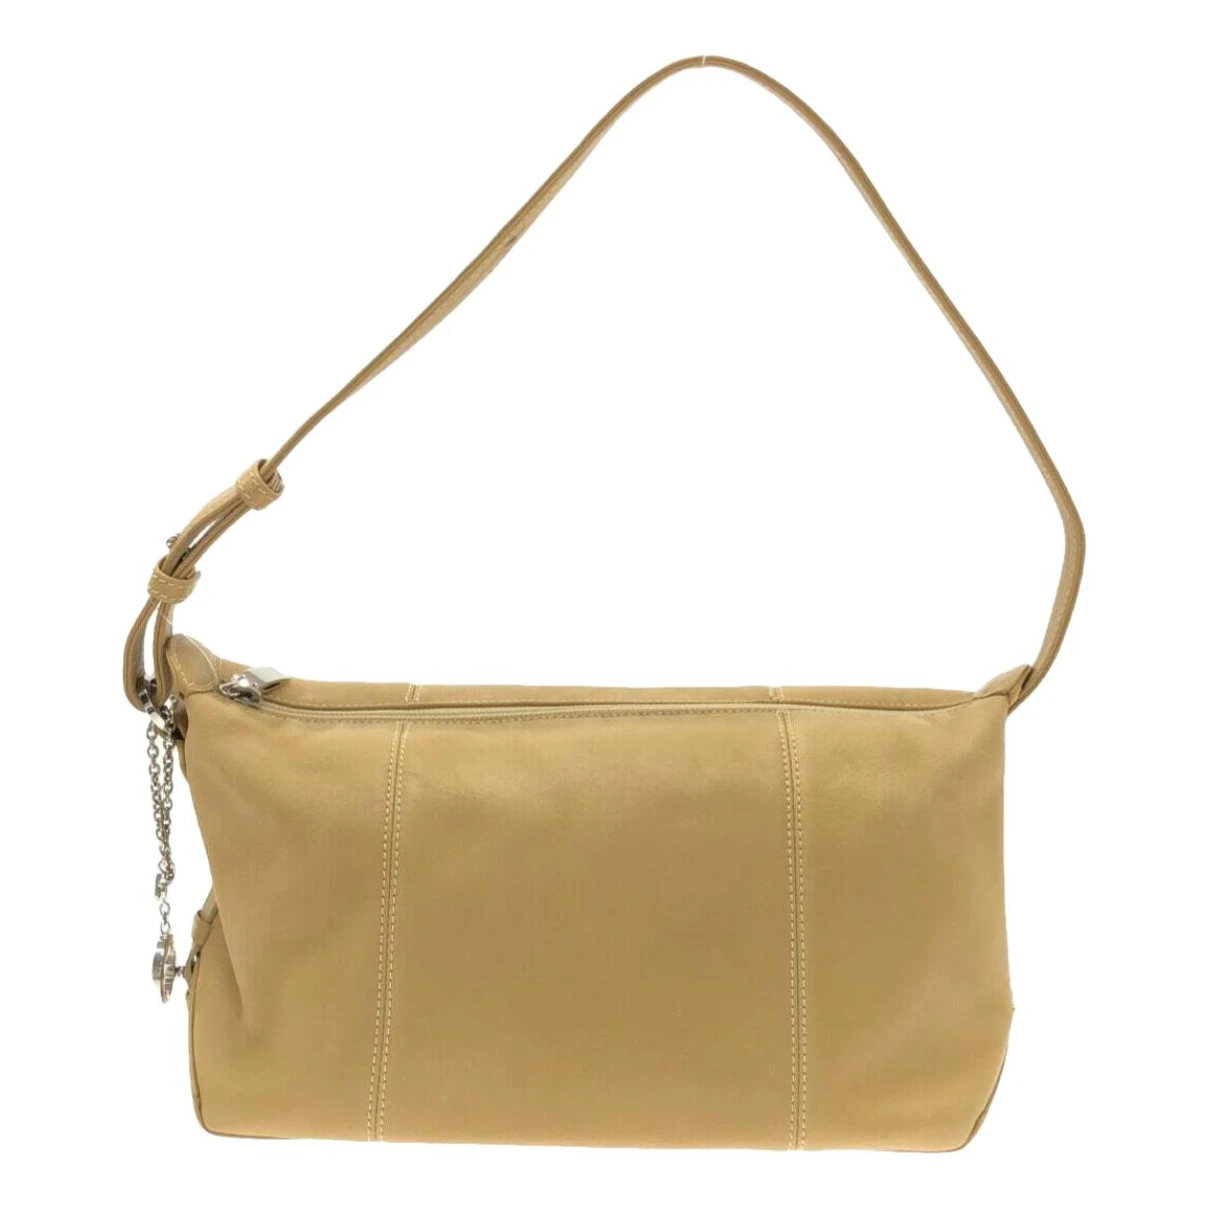 Pre-owned Montblanc Leather Handbag In Beige